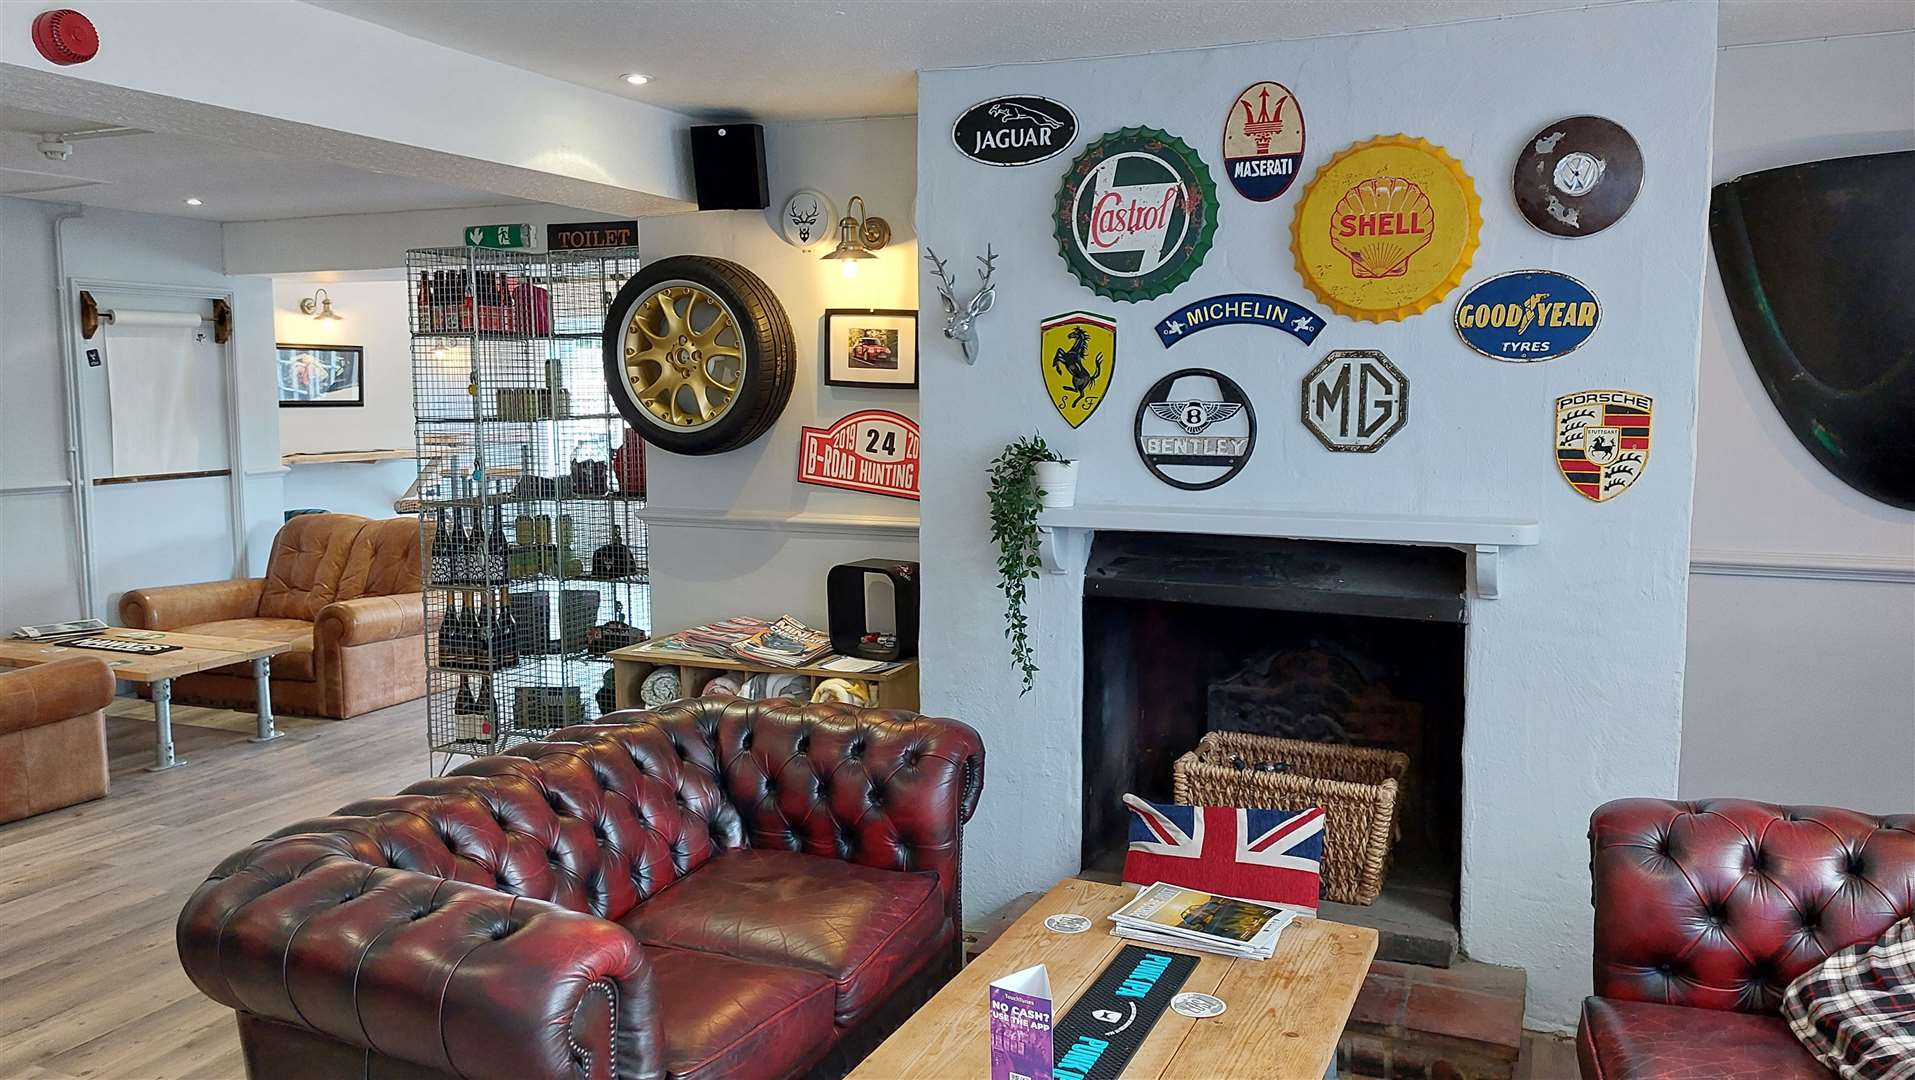 Inside The Stag in Challock, which opened on May Day Bank Holiday weekend